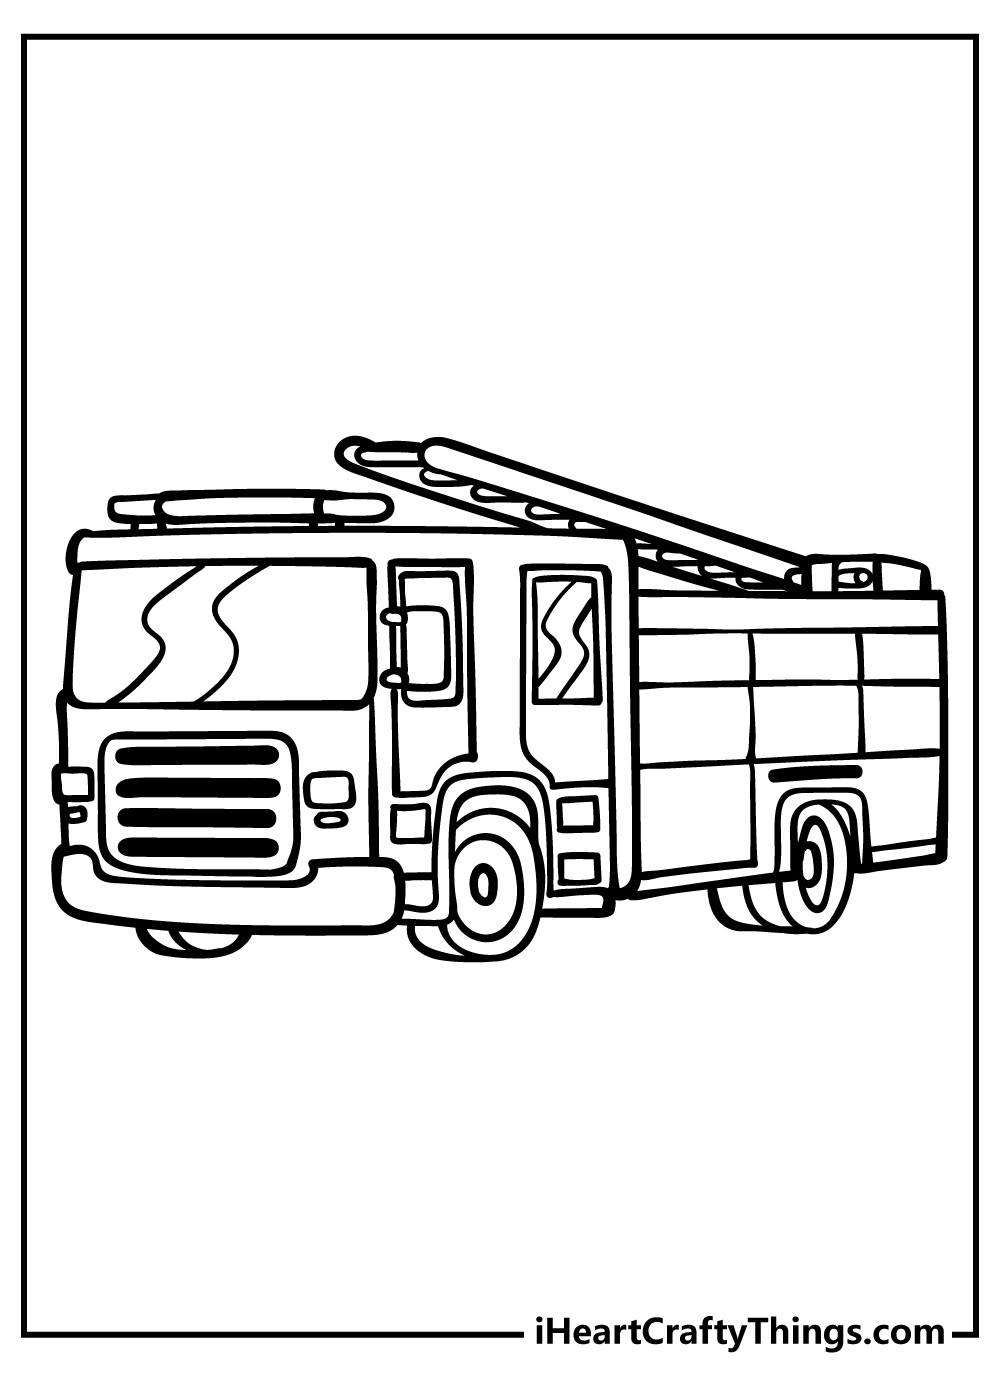 Fire truck coloring pages free printables